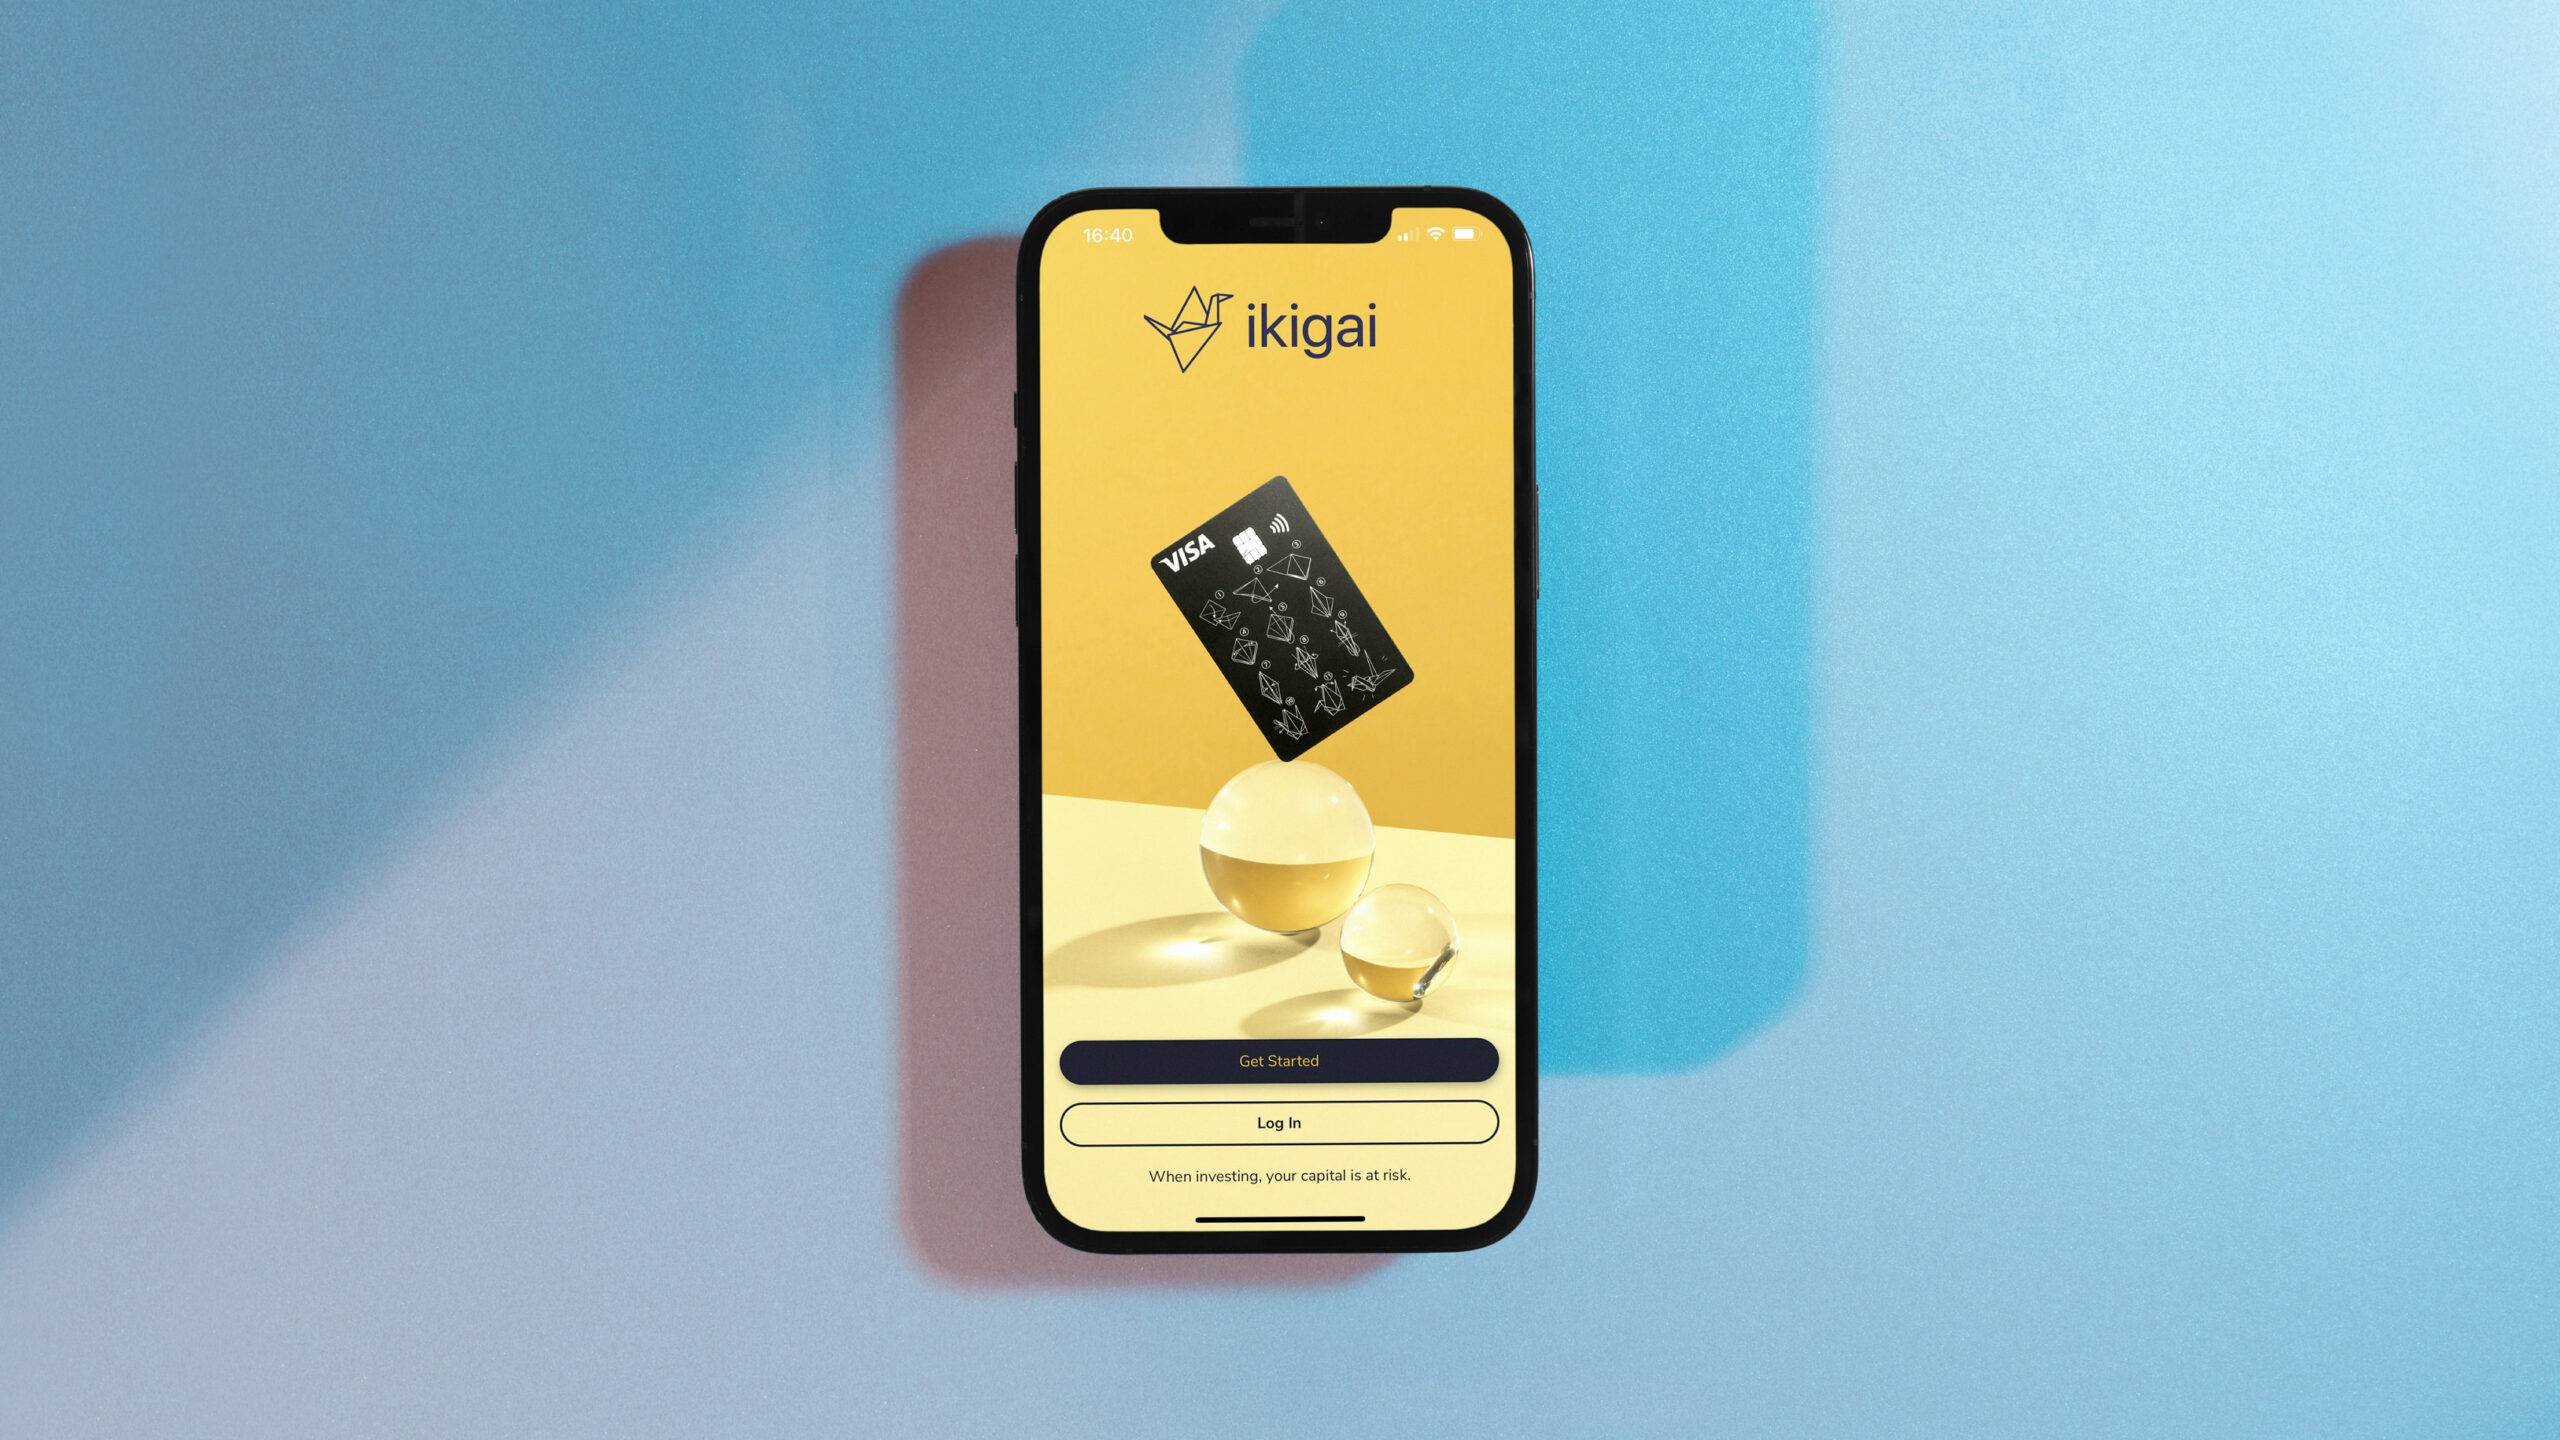 Meet ikigai: the app that’s taking a fresh approach to banking and investing